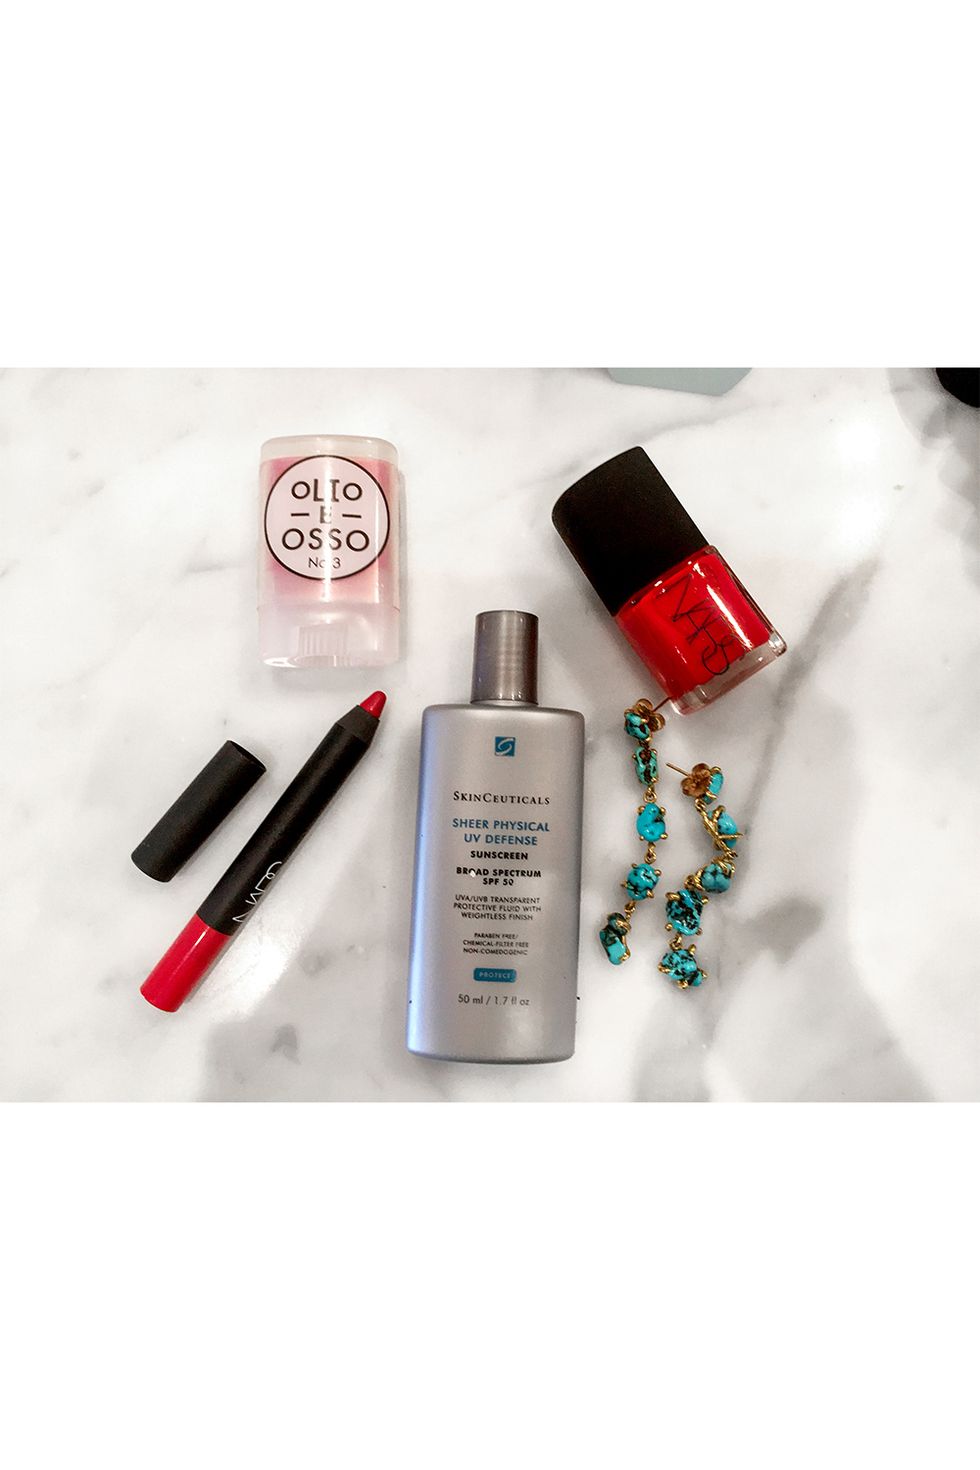 <p>Counterintuitive, I know, but to me nothing says summer like head-to-toe red. I'm obsessed with natural beauty brand Olio E Osso's crimson-tinted, olive oil–based lip balm for a subtle wash of color. For a bold lip, Nars's lip pencil is as easy as a Crayola. Nars's red is also pedicure perfection (I only wear polish in the summer), and turquoise drop earrings add swing and color. I use SkinCeuticals SPF 50 on my face every day; every makeup artist on location shoots tells me it's the best.
</p><p><i data-redactor-tag="i">Clockwise from top left: OLIO E OSSO Cheek and Lip Balm in No. 3 Crimson, $28. NARS Nail Polish in Dovima, $20. Turquoise earrings, LISA EISNER JEWELRY, $1,400. SKINCEUTICALS Sheer Physical UV Defense SPF 50, $34. NARS Velvet Matte Lip Pencil in Dragon Girl, $27</i></p>